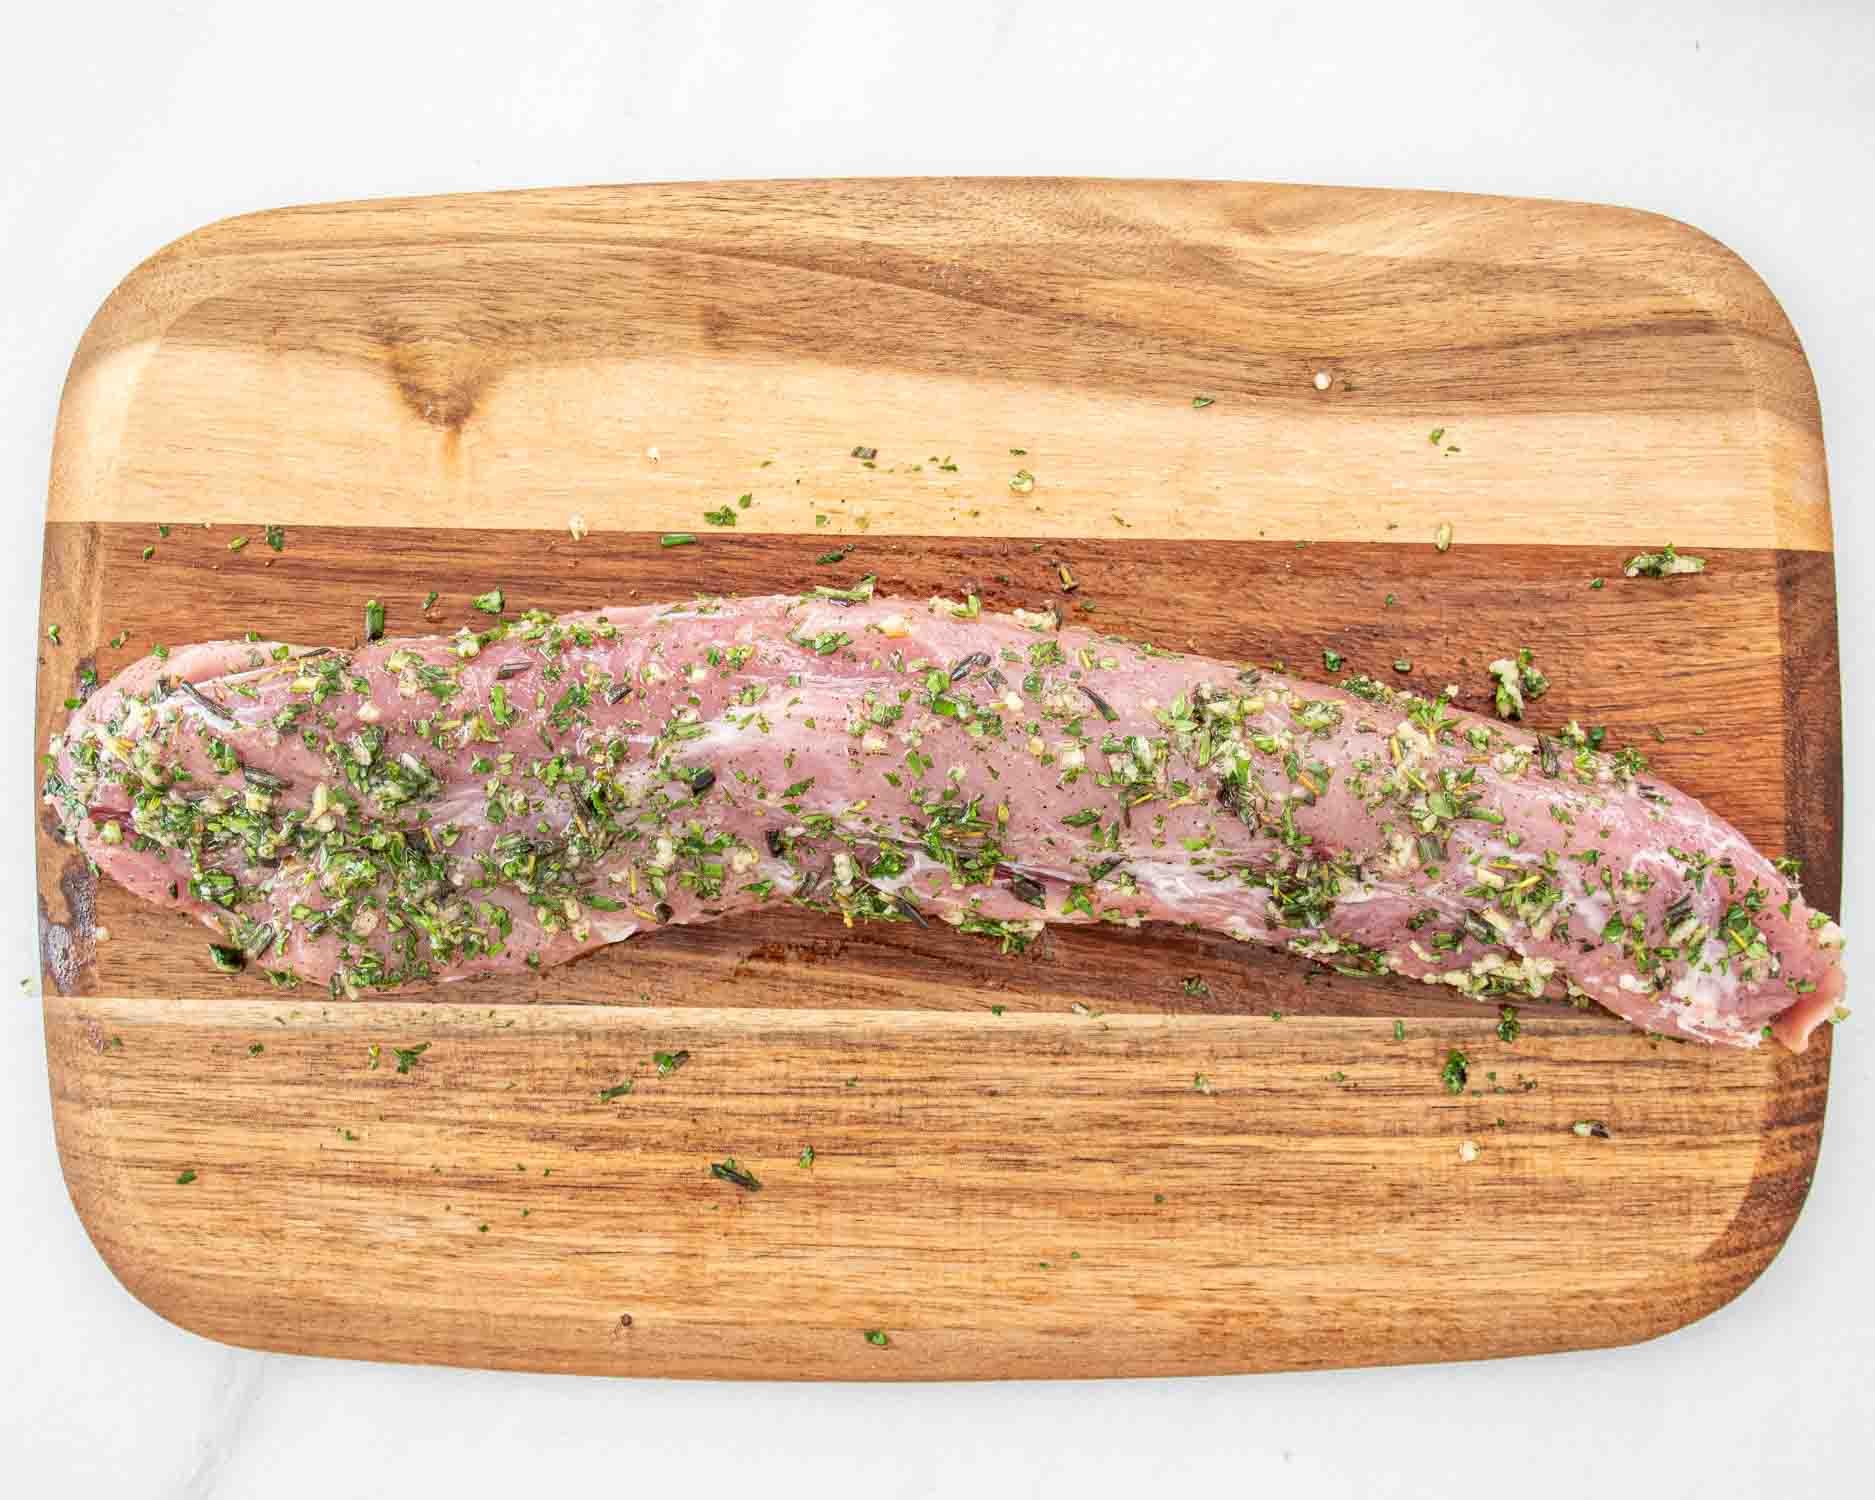 process shots showing how to make herb crusted pork tenderloin.